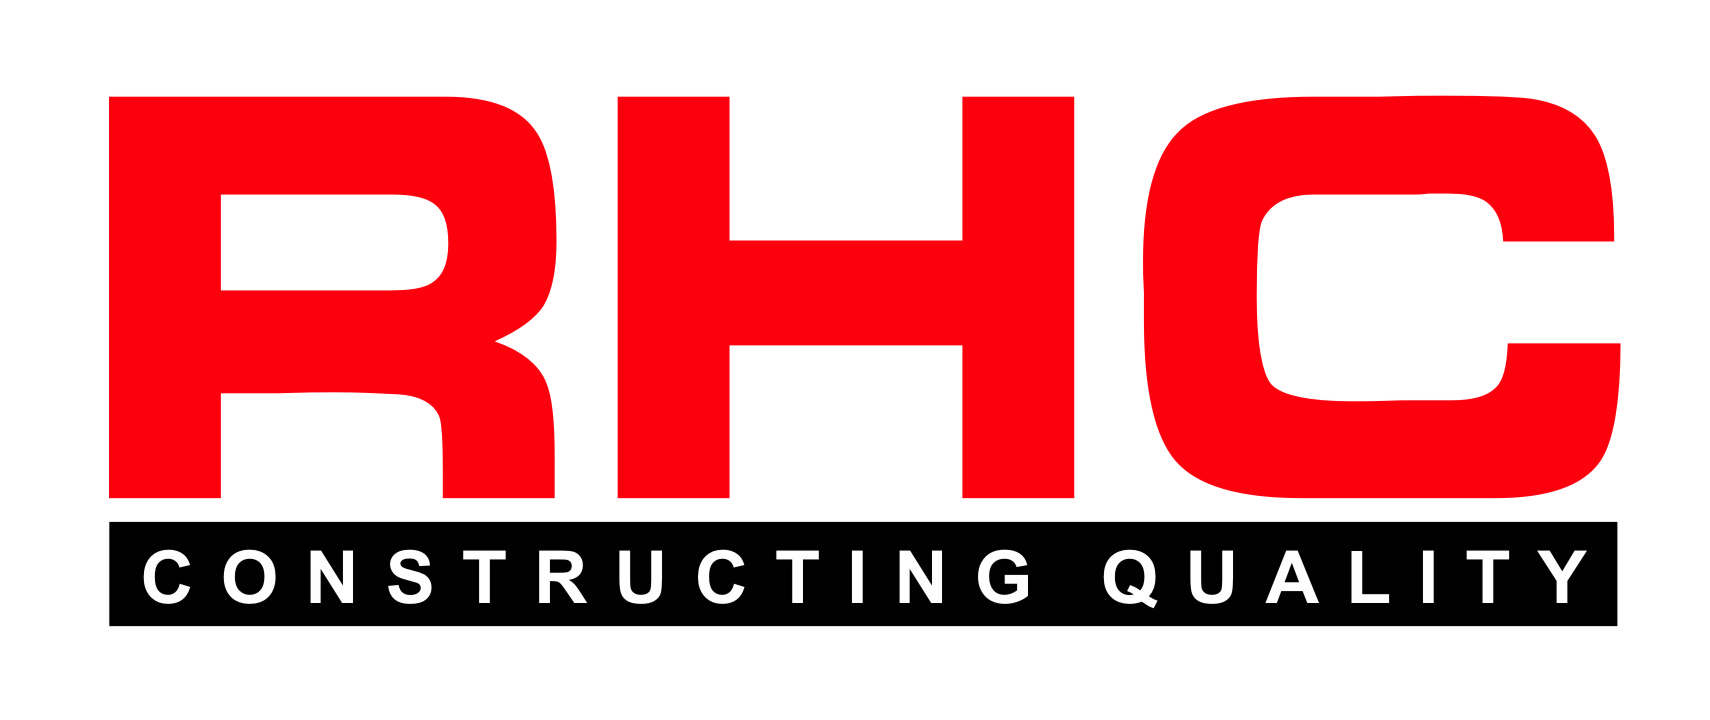 RHC setting benchmark in safe operation in industrial construction sector through cutting-edge strategic employee training